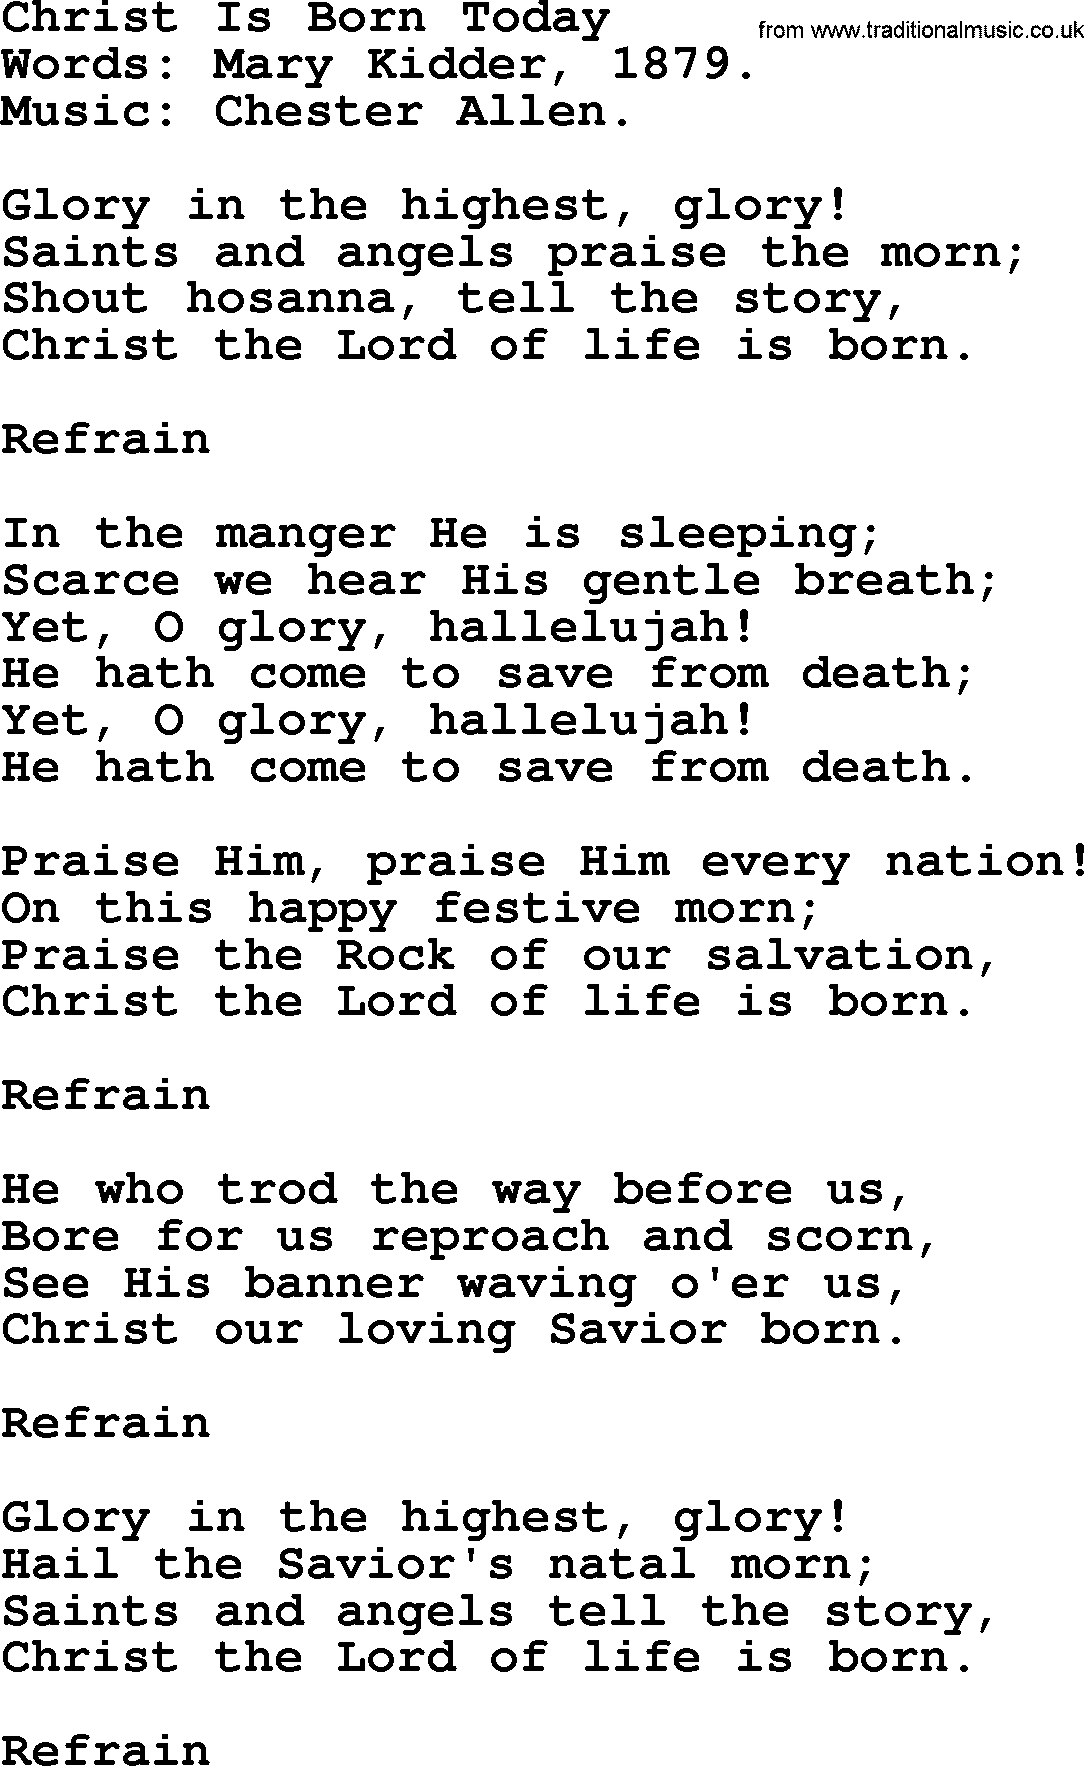 Christmas Hymns, Carols and Songs, title: Christ Is Born Today, lyrics with PDF